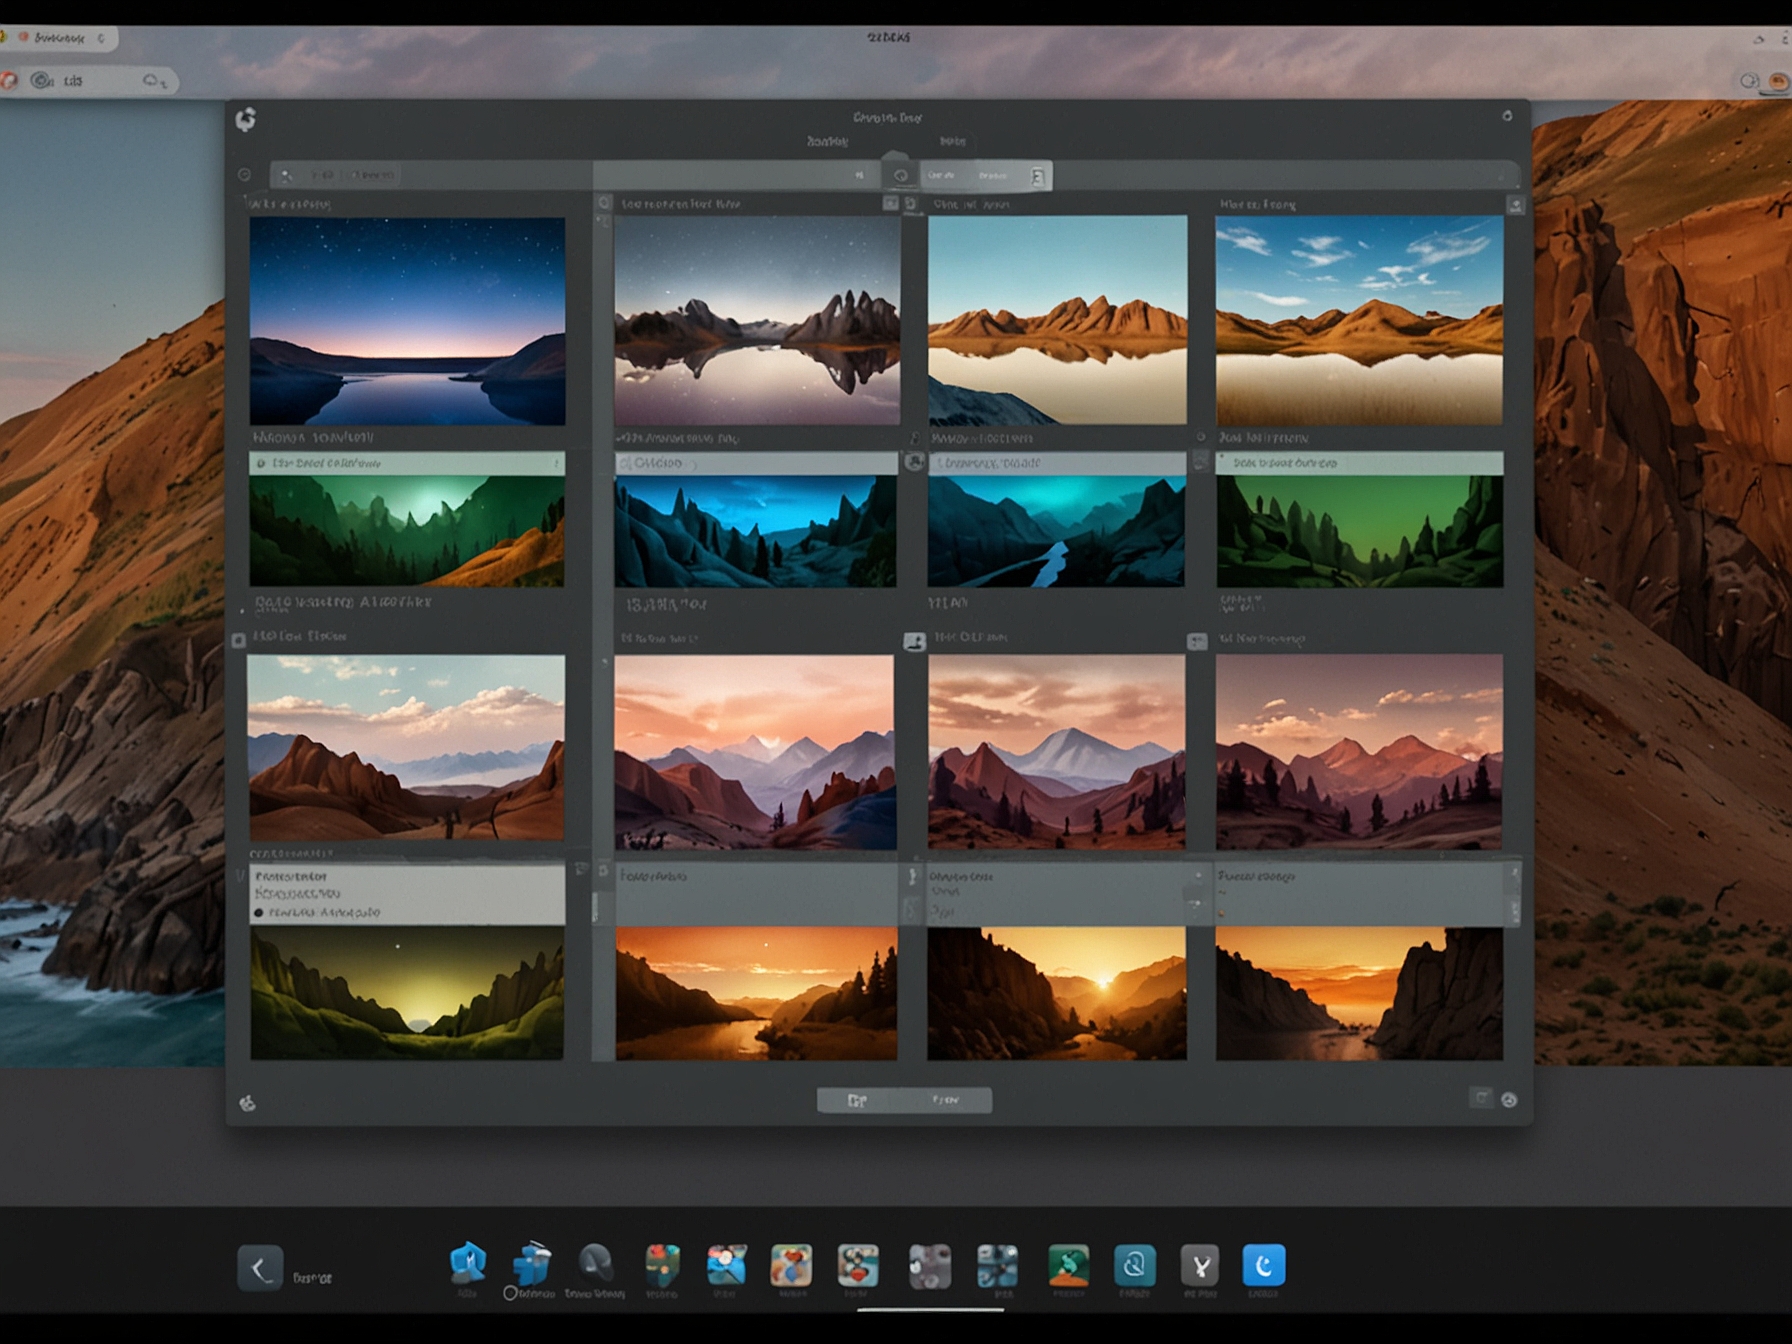 A screenshot of the macOS Sequoia interface demonstrating Window Tiling, with multiple application windows neatly snapped side-by-side for improved productivity.